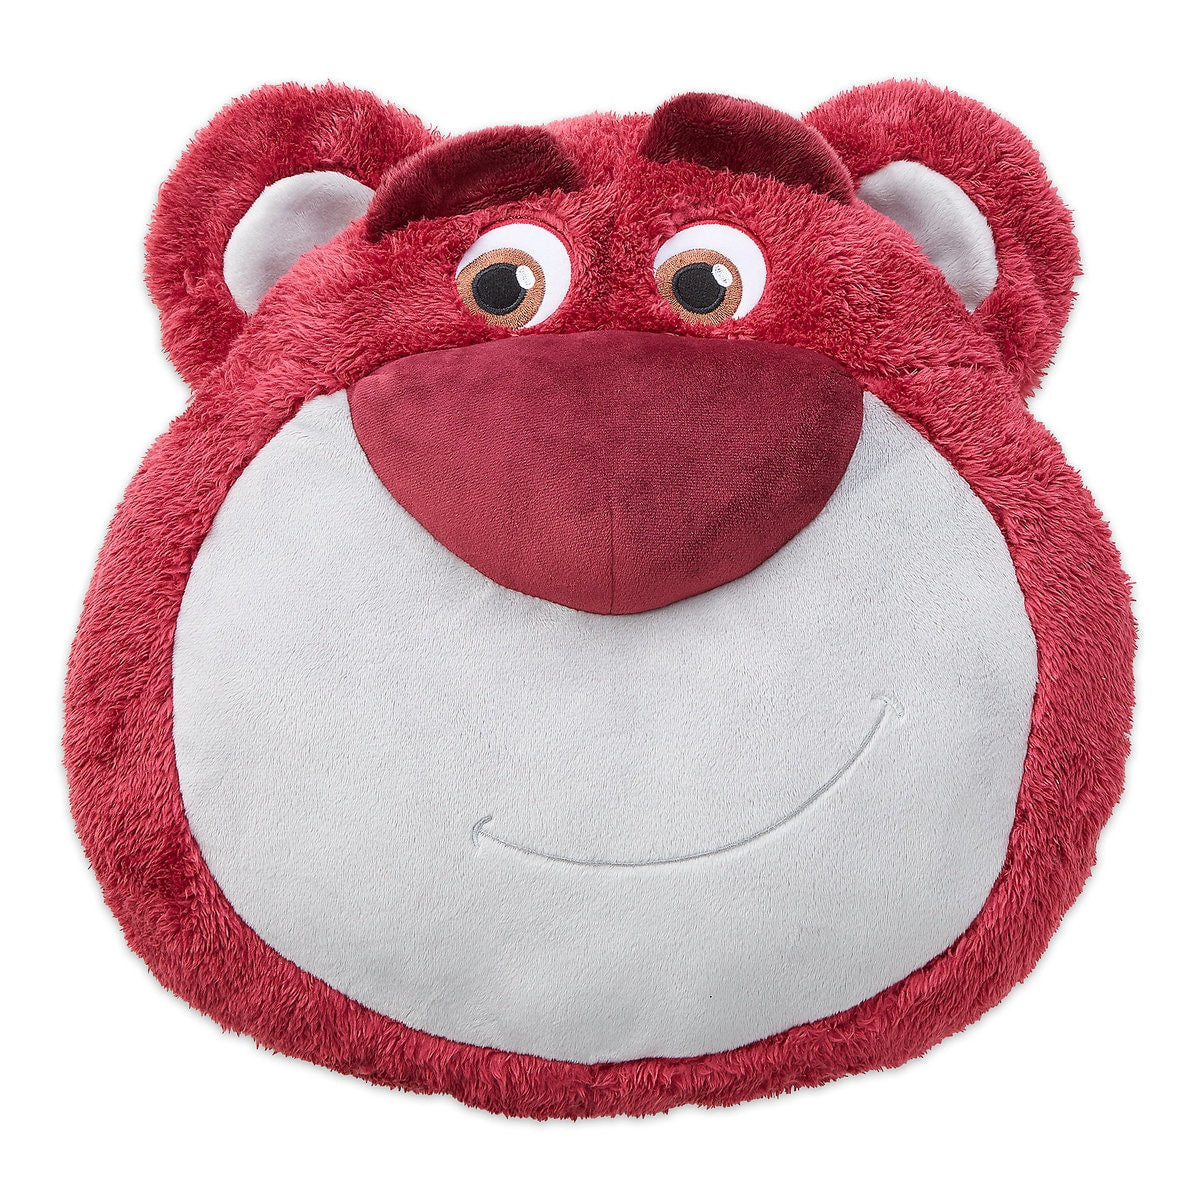 Disney Toy Story 3 Lotso Face Plush Pillow Plush New with Tags